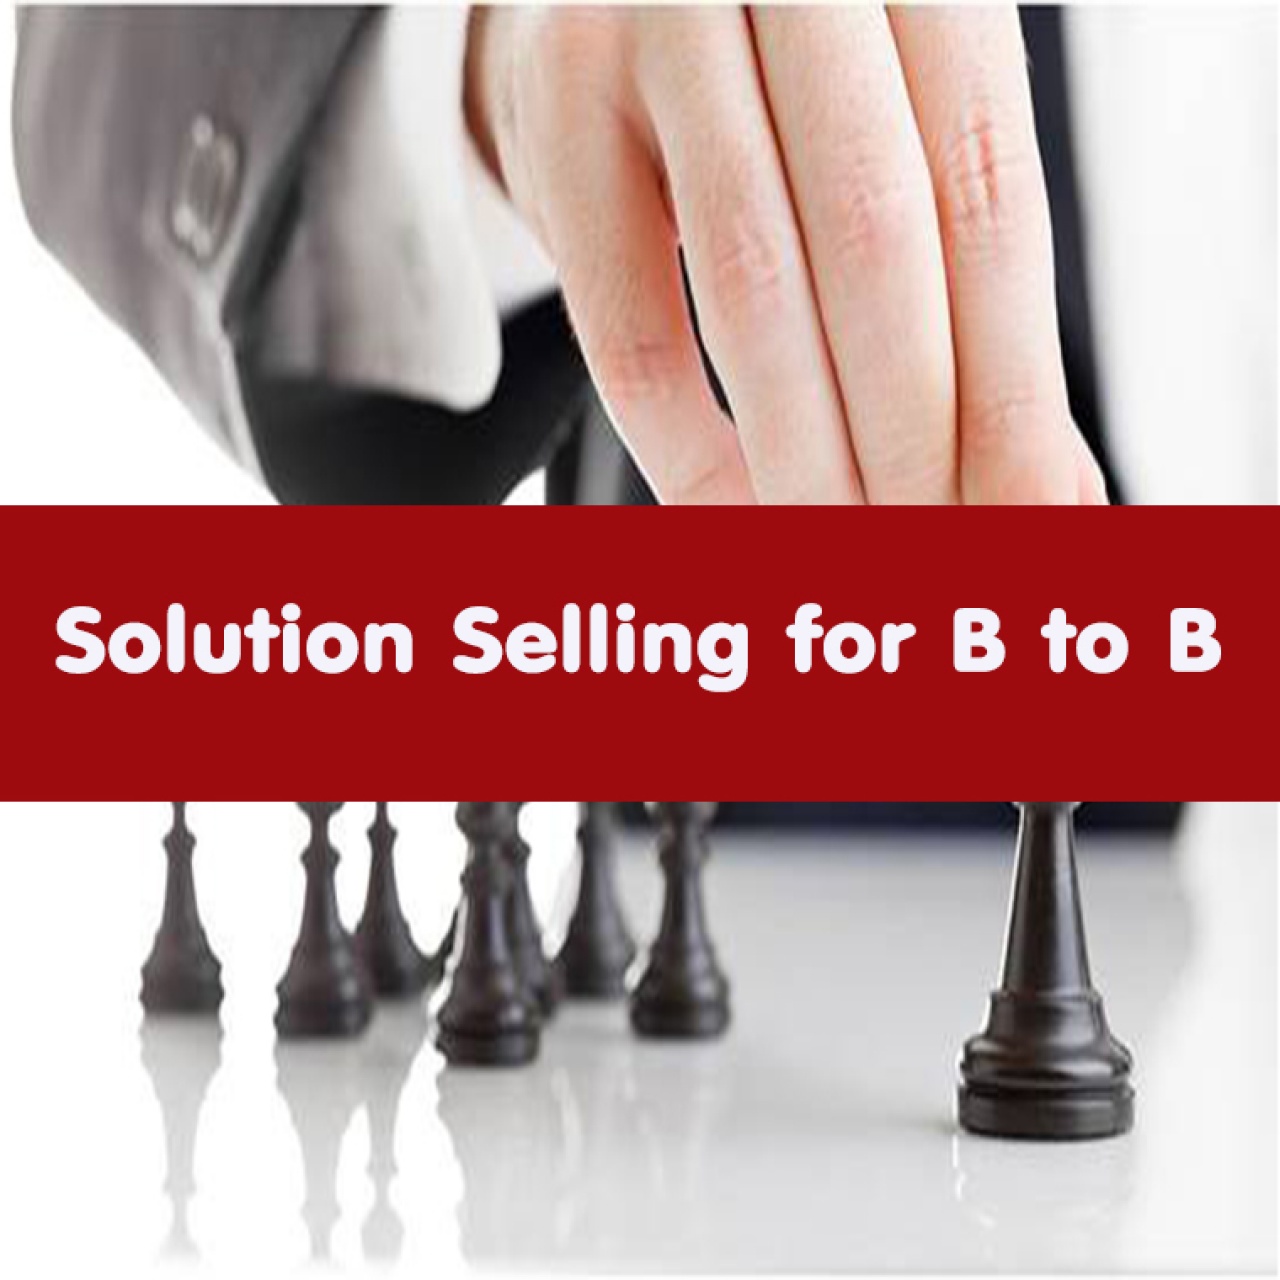 Solution Selling for B to B อบรม วันที่ 14 มิ.ย. 66